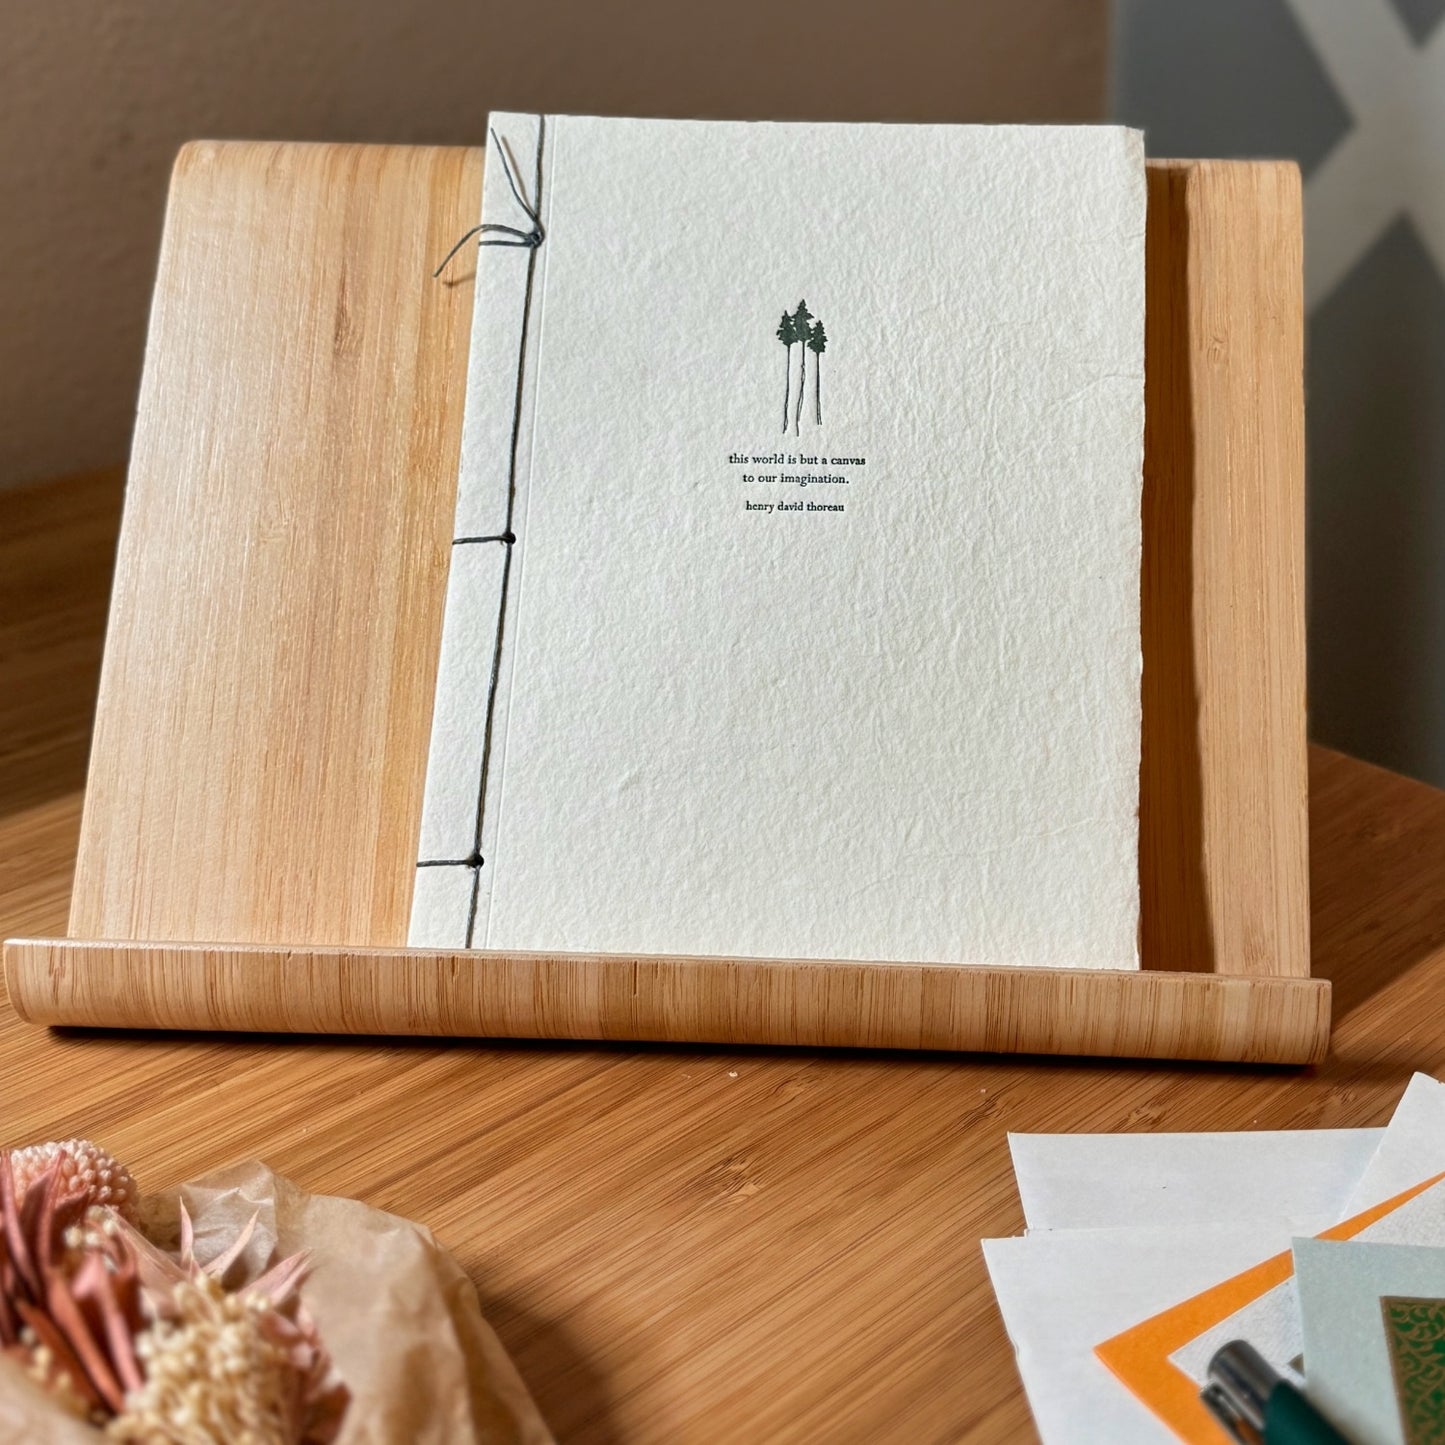 Handmade paper journal with green trees and a quote from Henry David Thoreau printed on cover